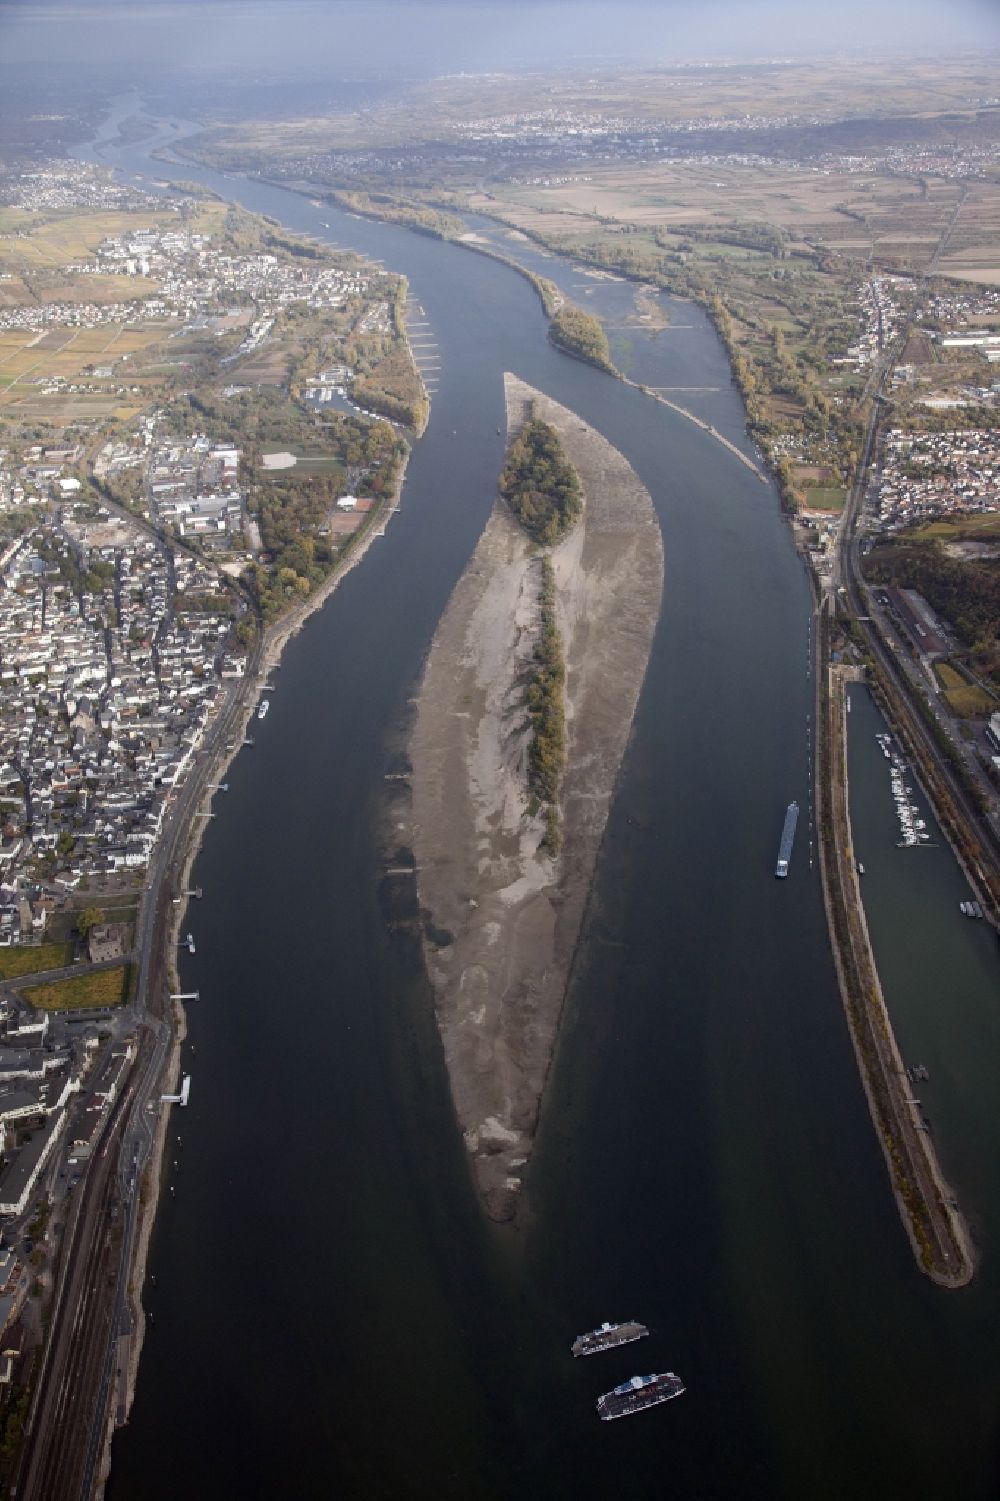 Aerial image Bingen am Rhein - Shore areas exposed by low-water level riverbed on the Rhine river in Bingen am Rhein in the state Rhineland-Palatinate, Germany. Opposite, on the right bank of the Rhine (left) lies Ruedesheim am Rhein